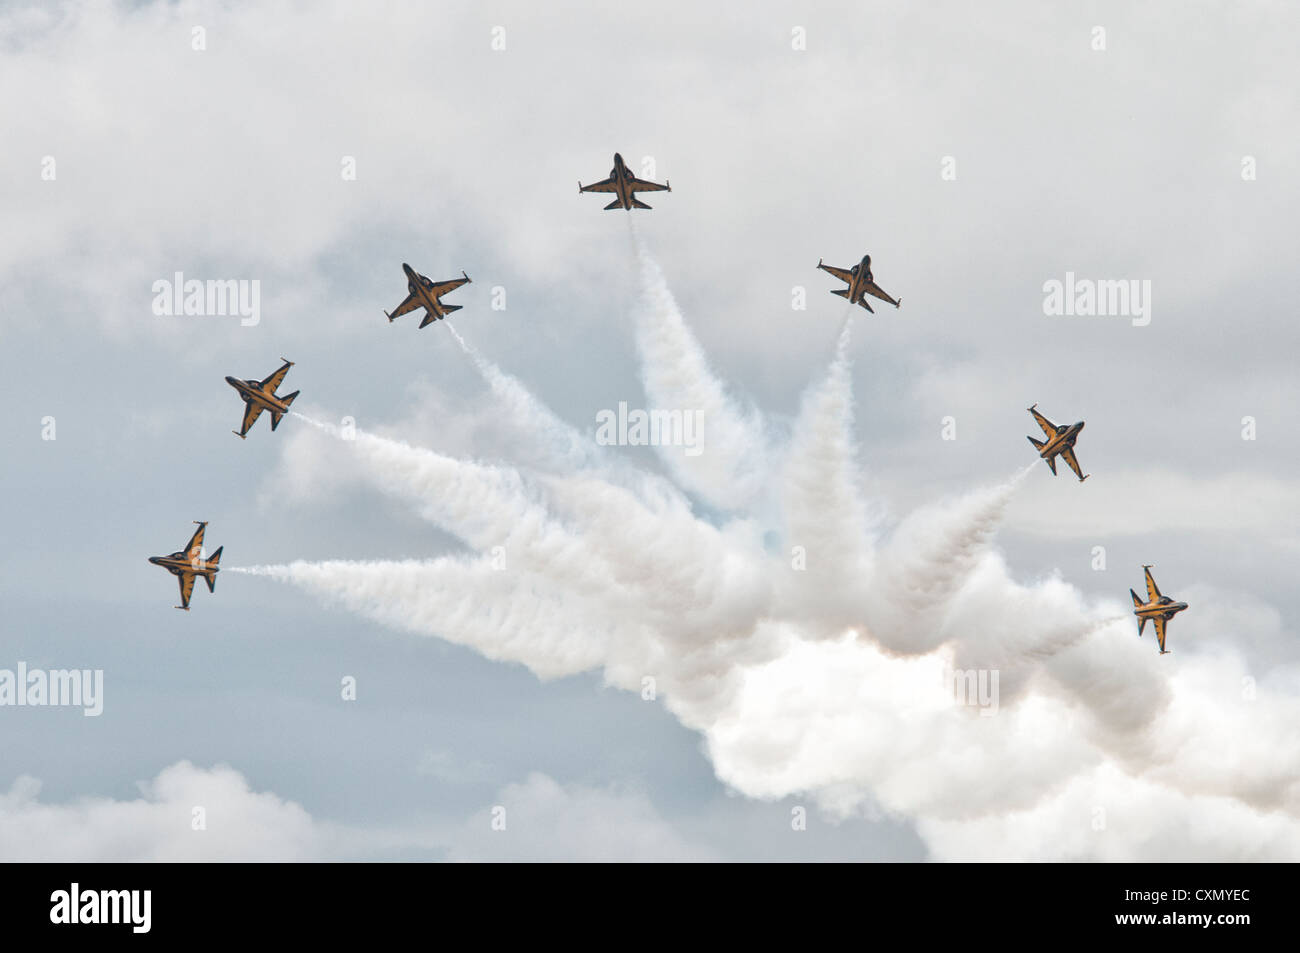 The Black Eagles display team from South Korea perform an amazing and dynamic display of precision aerobatics at the 2012 RIAT Stock Photo